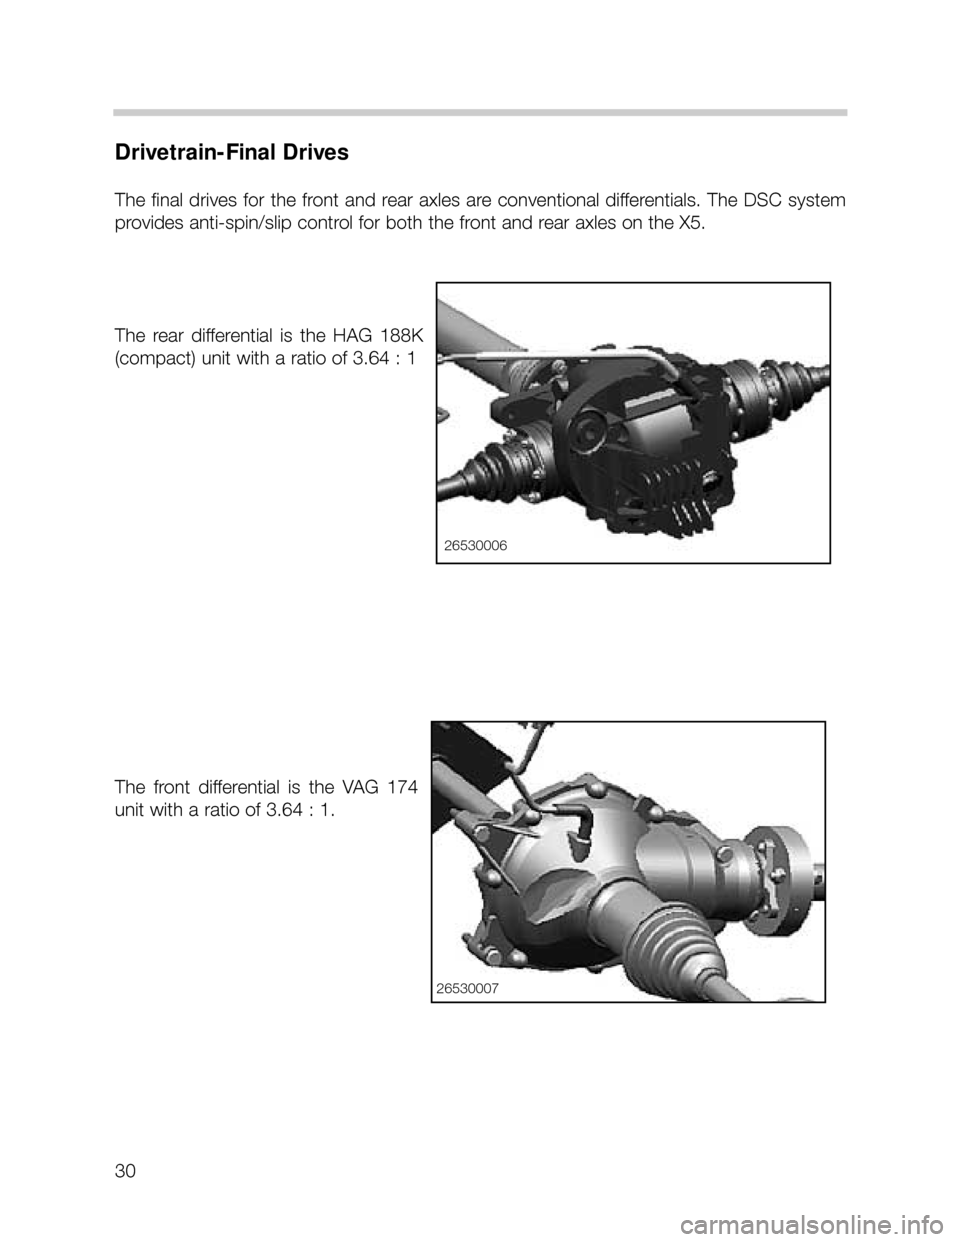 BMW X5 2004 E53 Owners Manual 30
Drivetrain-Final Drives
The final drives for the front and rear axles are conventional differentials. The DSC system
provides anti-spin/slip control for both the front and rear axles on the X5.
The